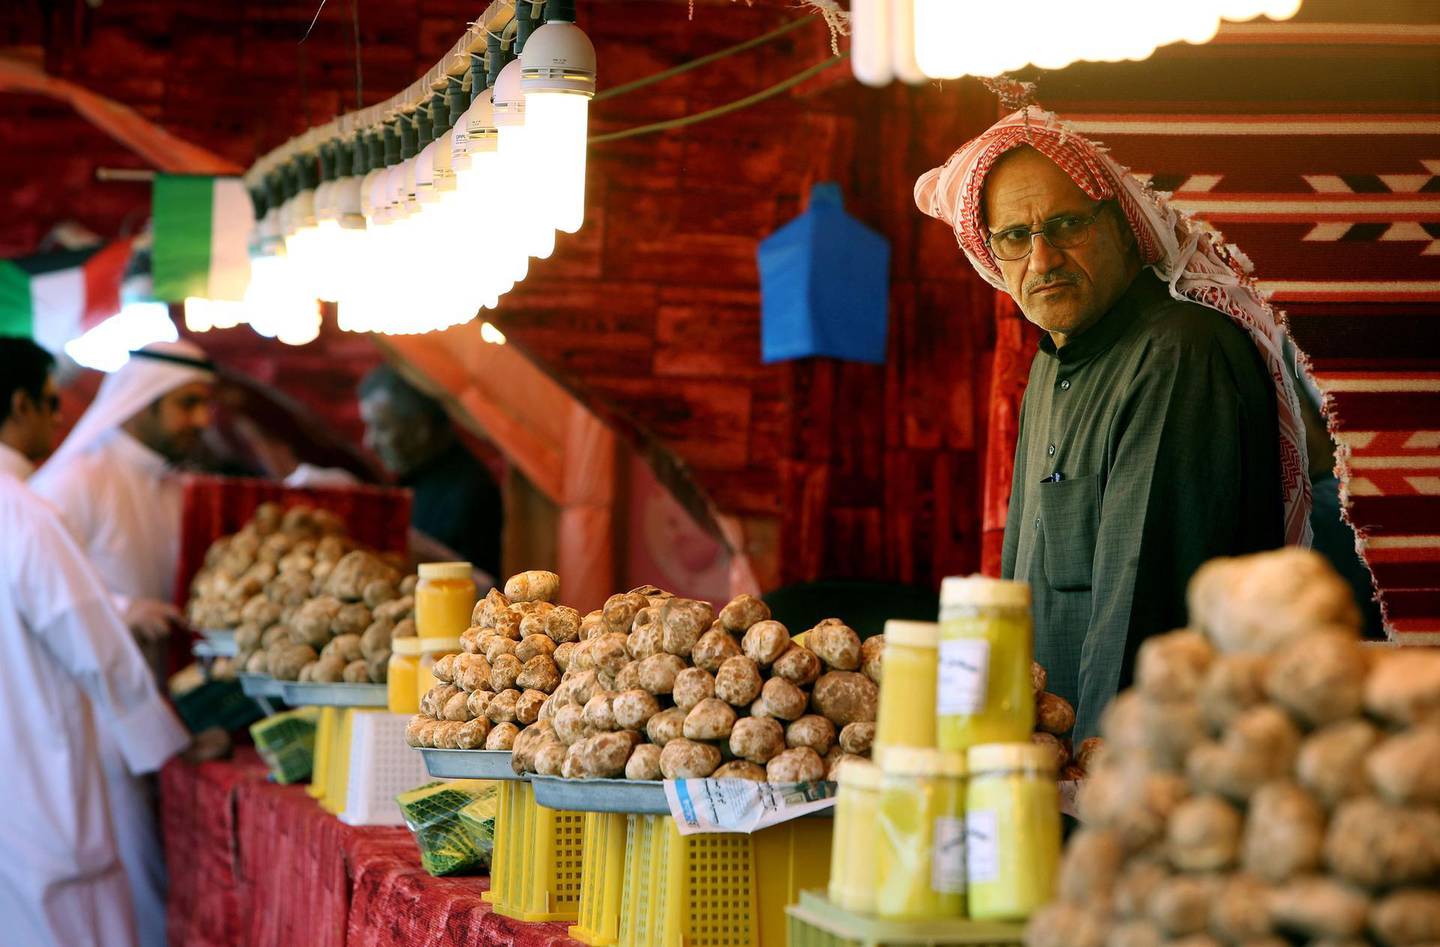 A Kuwaiti vendor stands behind his truffles for sale at a market in al-Rai, an industrial zone northwest of Kuwait City on March 1, 2018. 
White or beige, but never black, the "desert truffle" is a rare delicacy with a dedicated marketplace in Kuwait, where remnants of the Iraqi invasion and changing weather patterns have decimated local production. / AFP PHOTO / YASSER AL-ZAYYAT